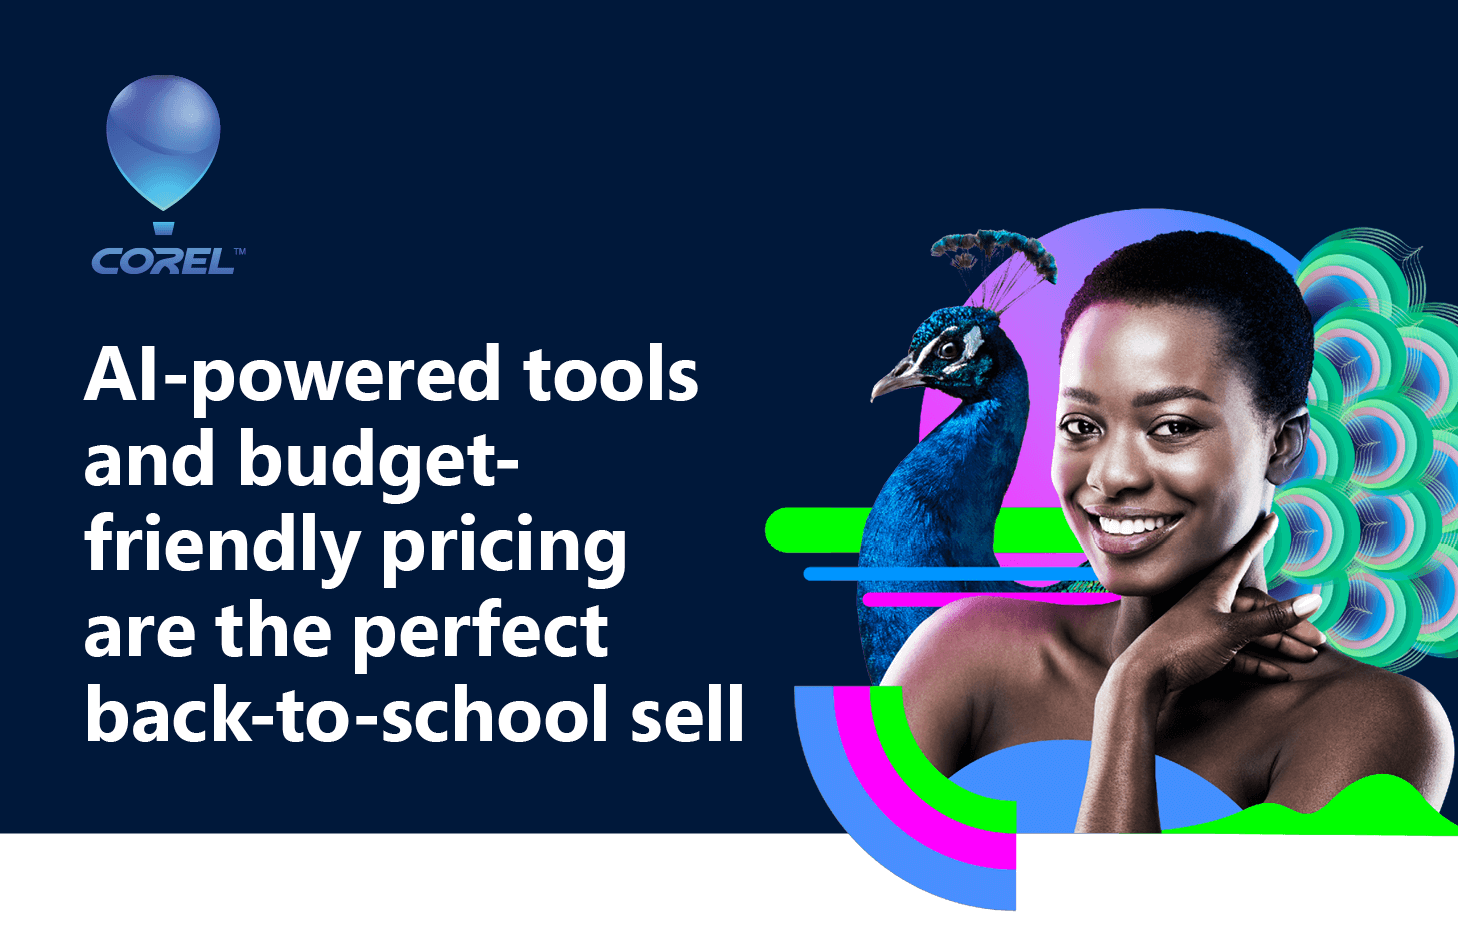 AI-powered tools and budget-friendly pricing are the perfect back-to-school sell.